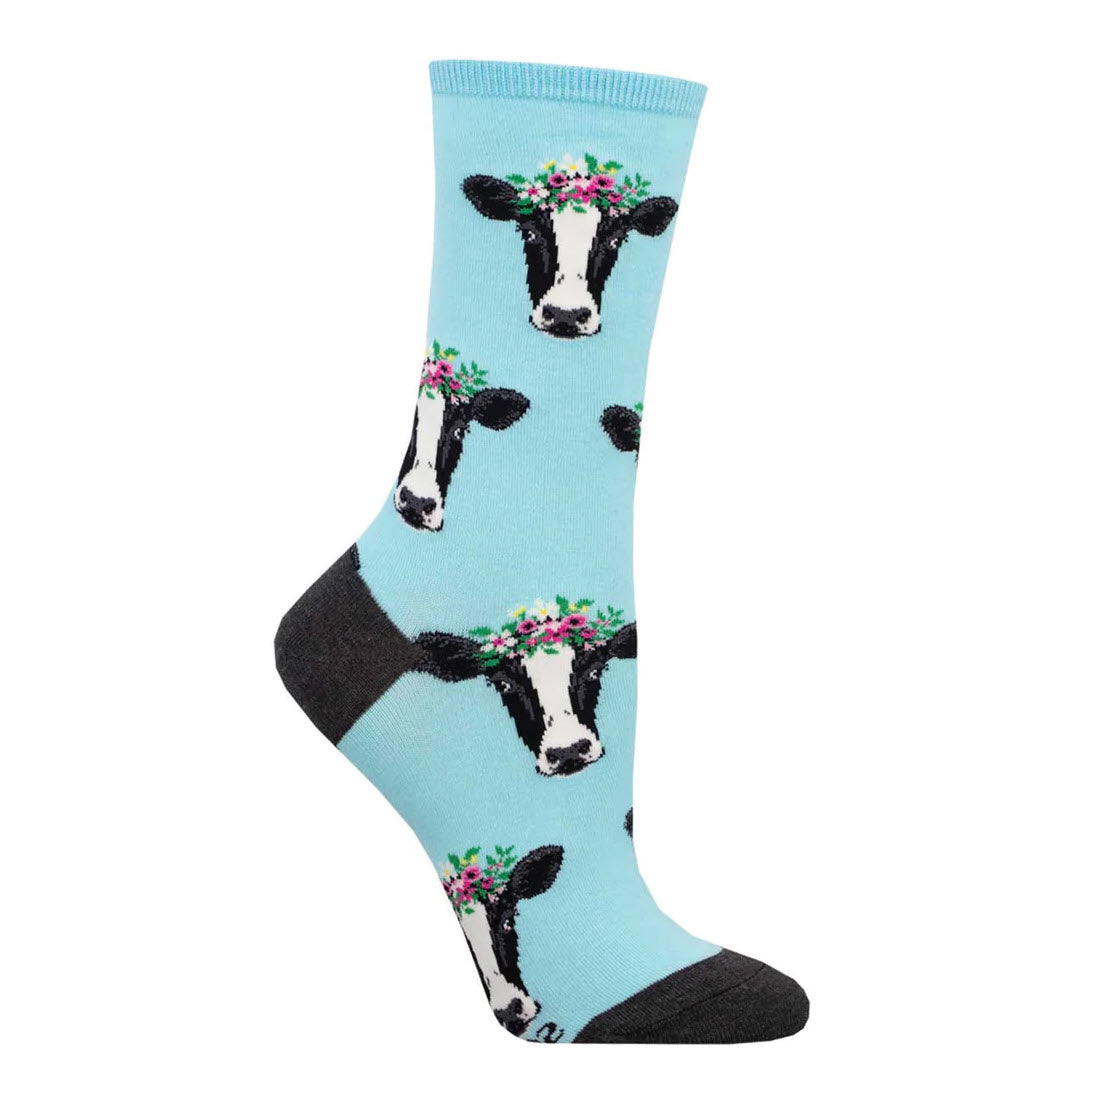 A fabulous Socksmith Wow Cow Crew Sock in light blue featuring a pattern of cow faces adorned with floral crowns, with a dark gray toe section.